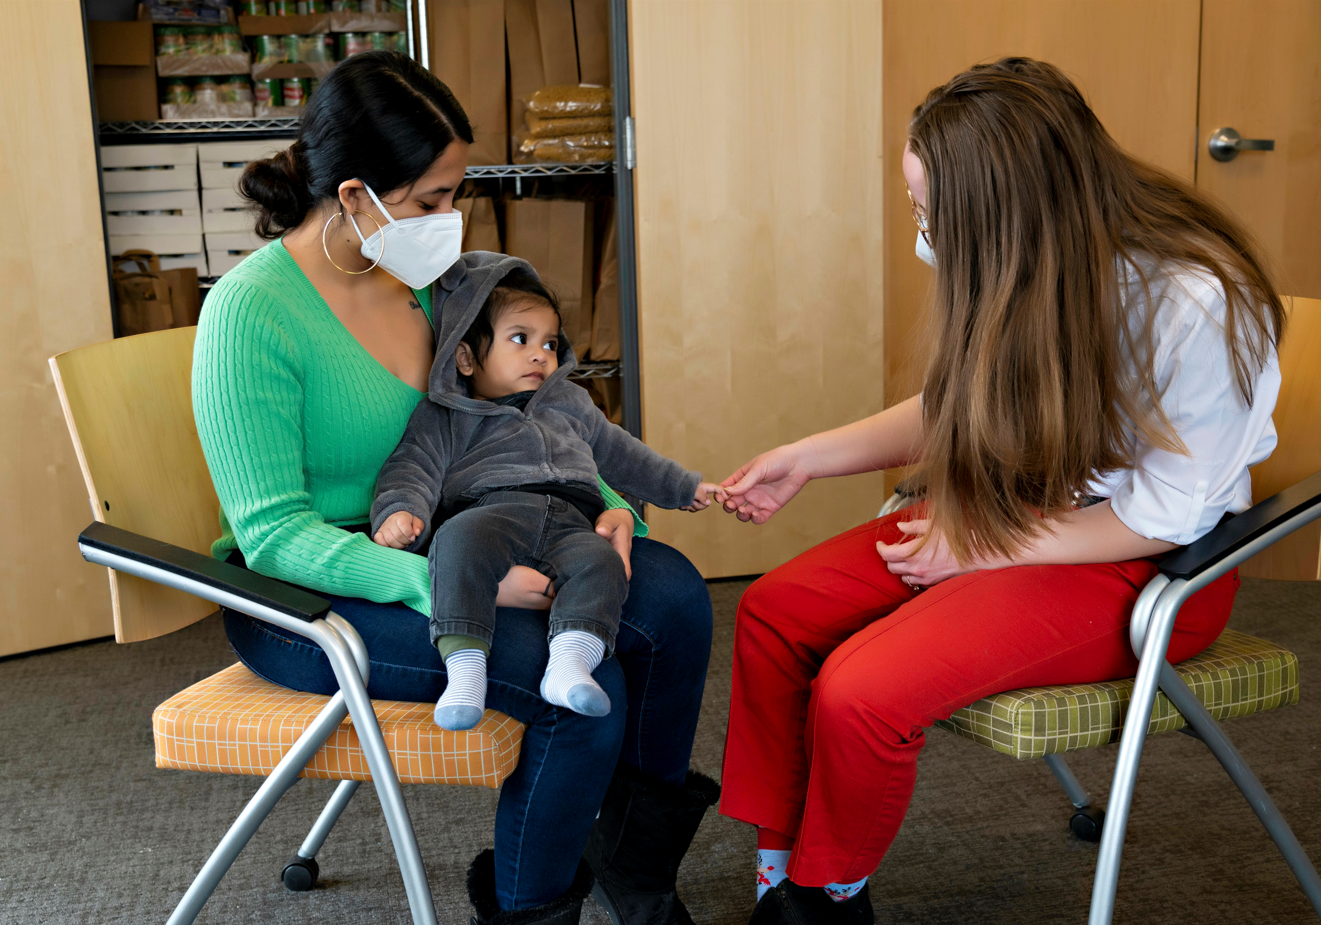 Wesley speaks with Thiago and his mother at the OneWorld dry food pantry. They are sitting down and wearing masks.